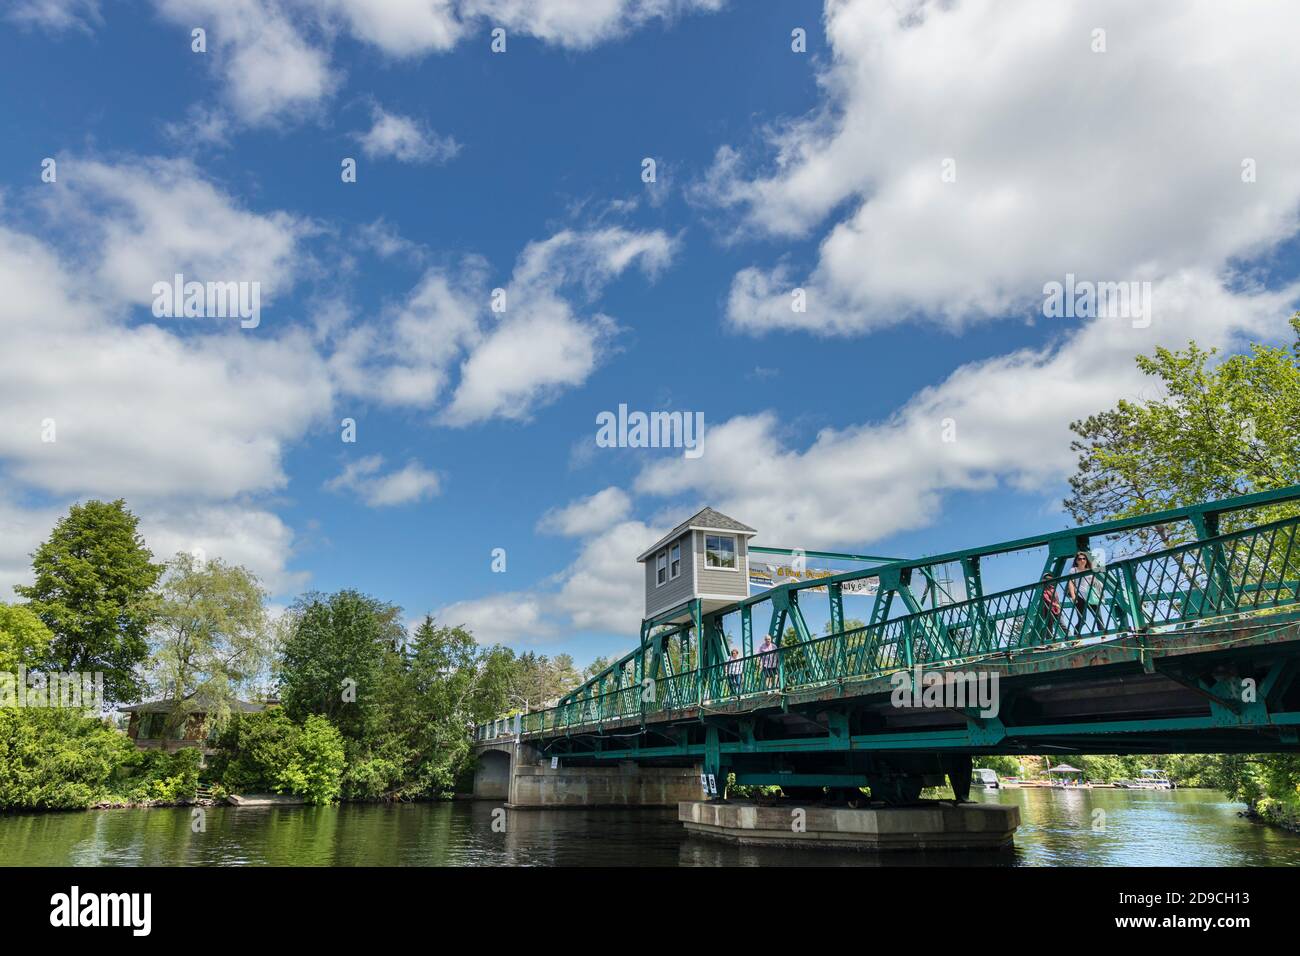 A view of the Huntsville Swing Bridge from the Town Dock Park on the Muskoka River. Stock Photo